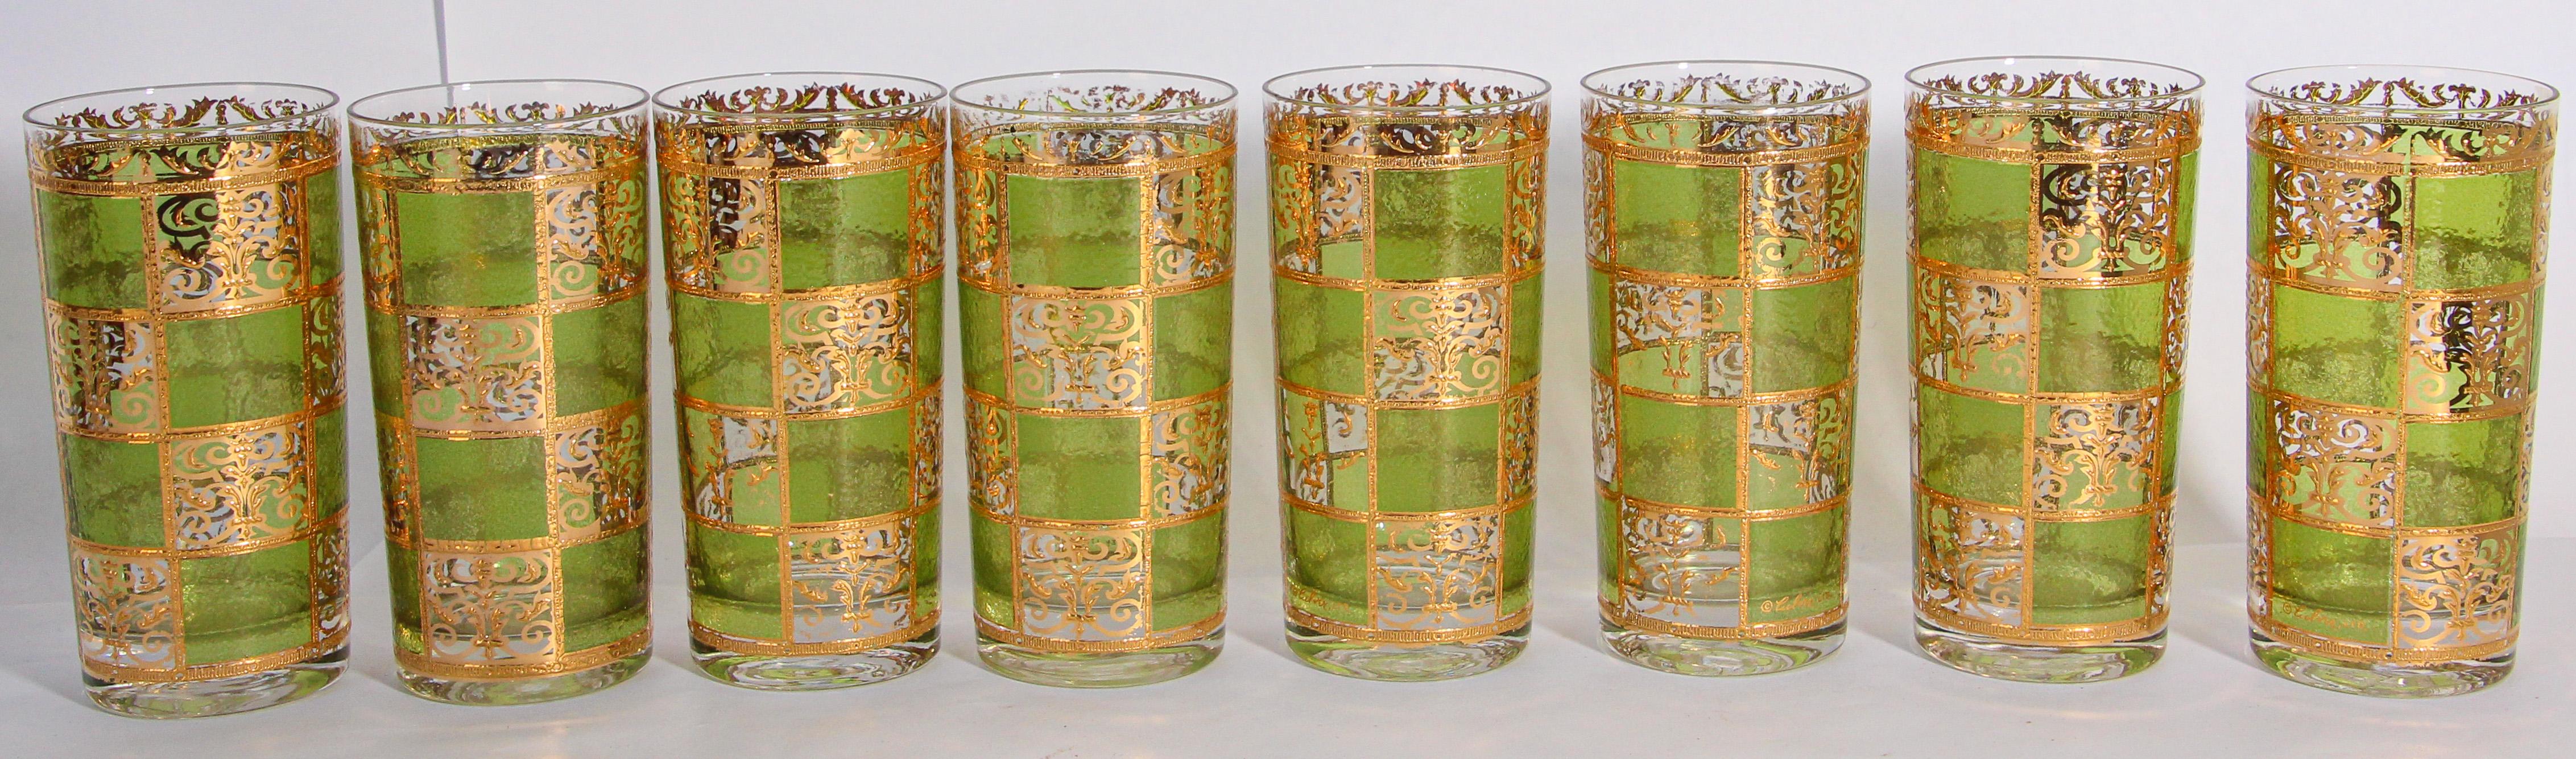 culver green and gold glasses